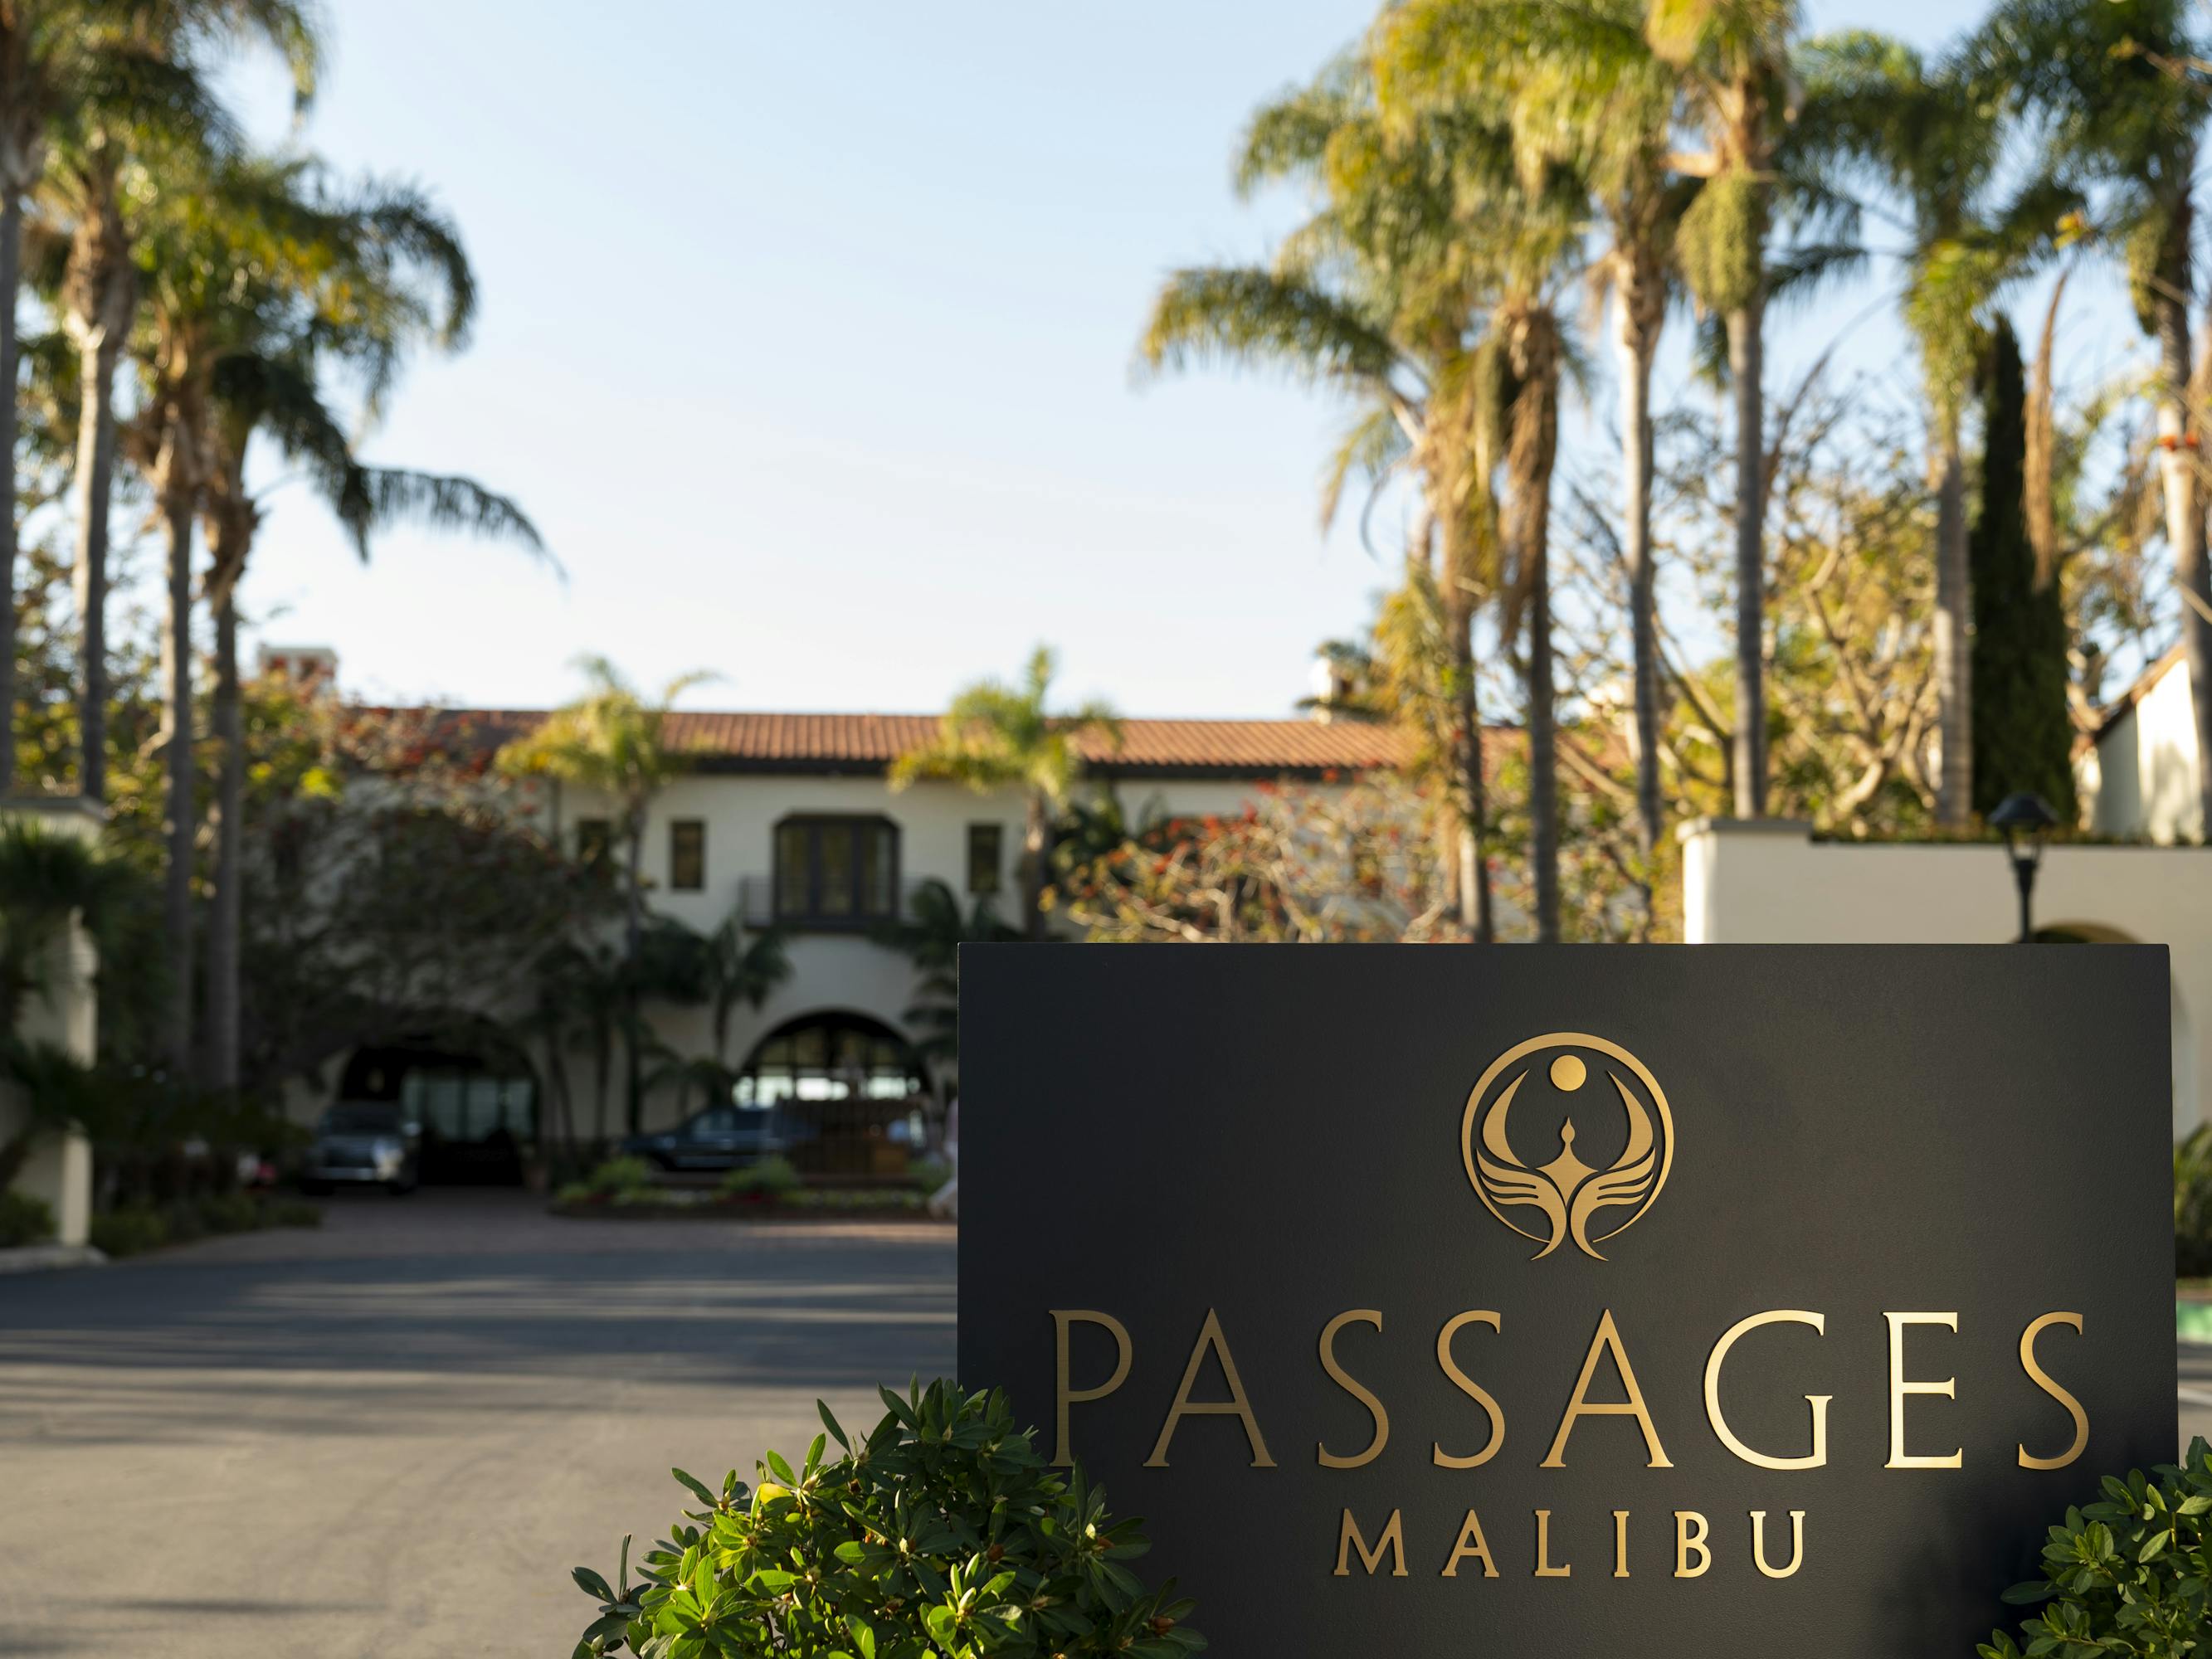 Passages Rehab center in Malibu. The parking lot is empty, and flanked by tall palm trees.